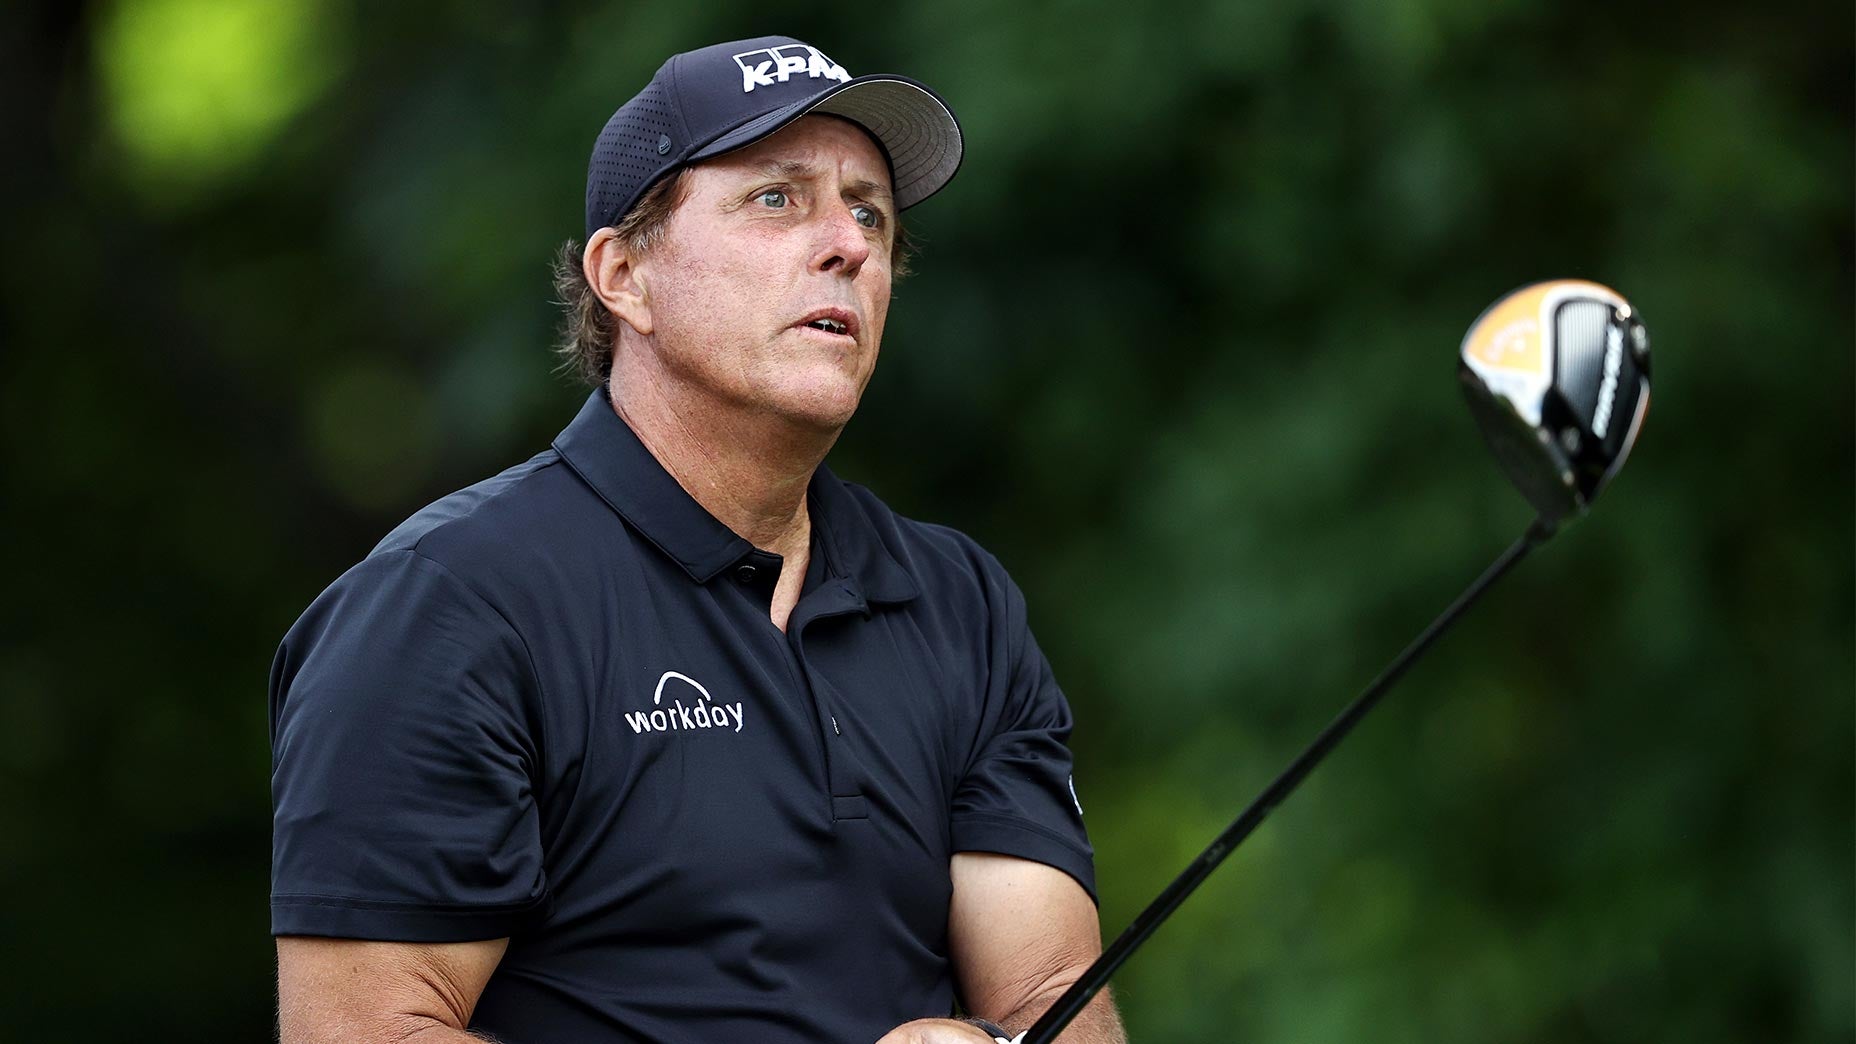 Phil Mickelson won't need (potentially awkward) invite for 2020 U.S. Open